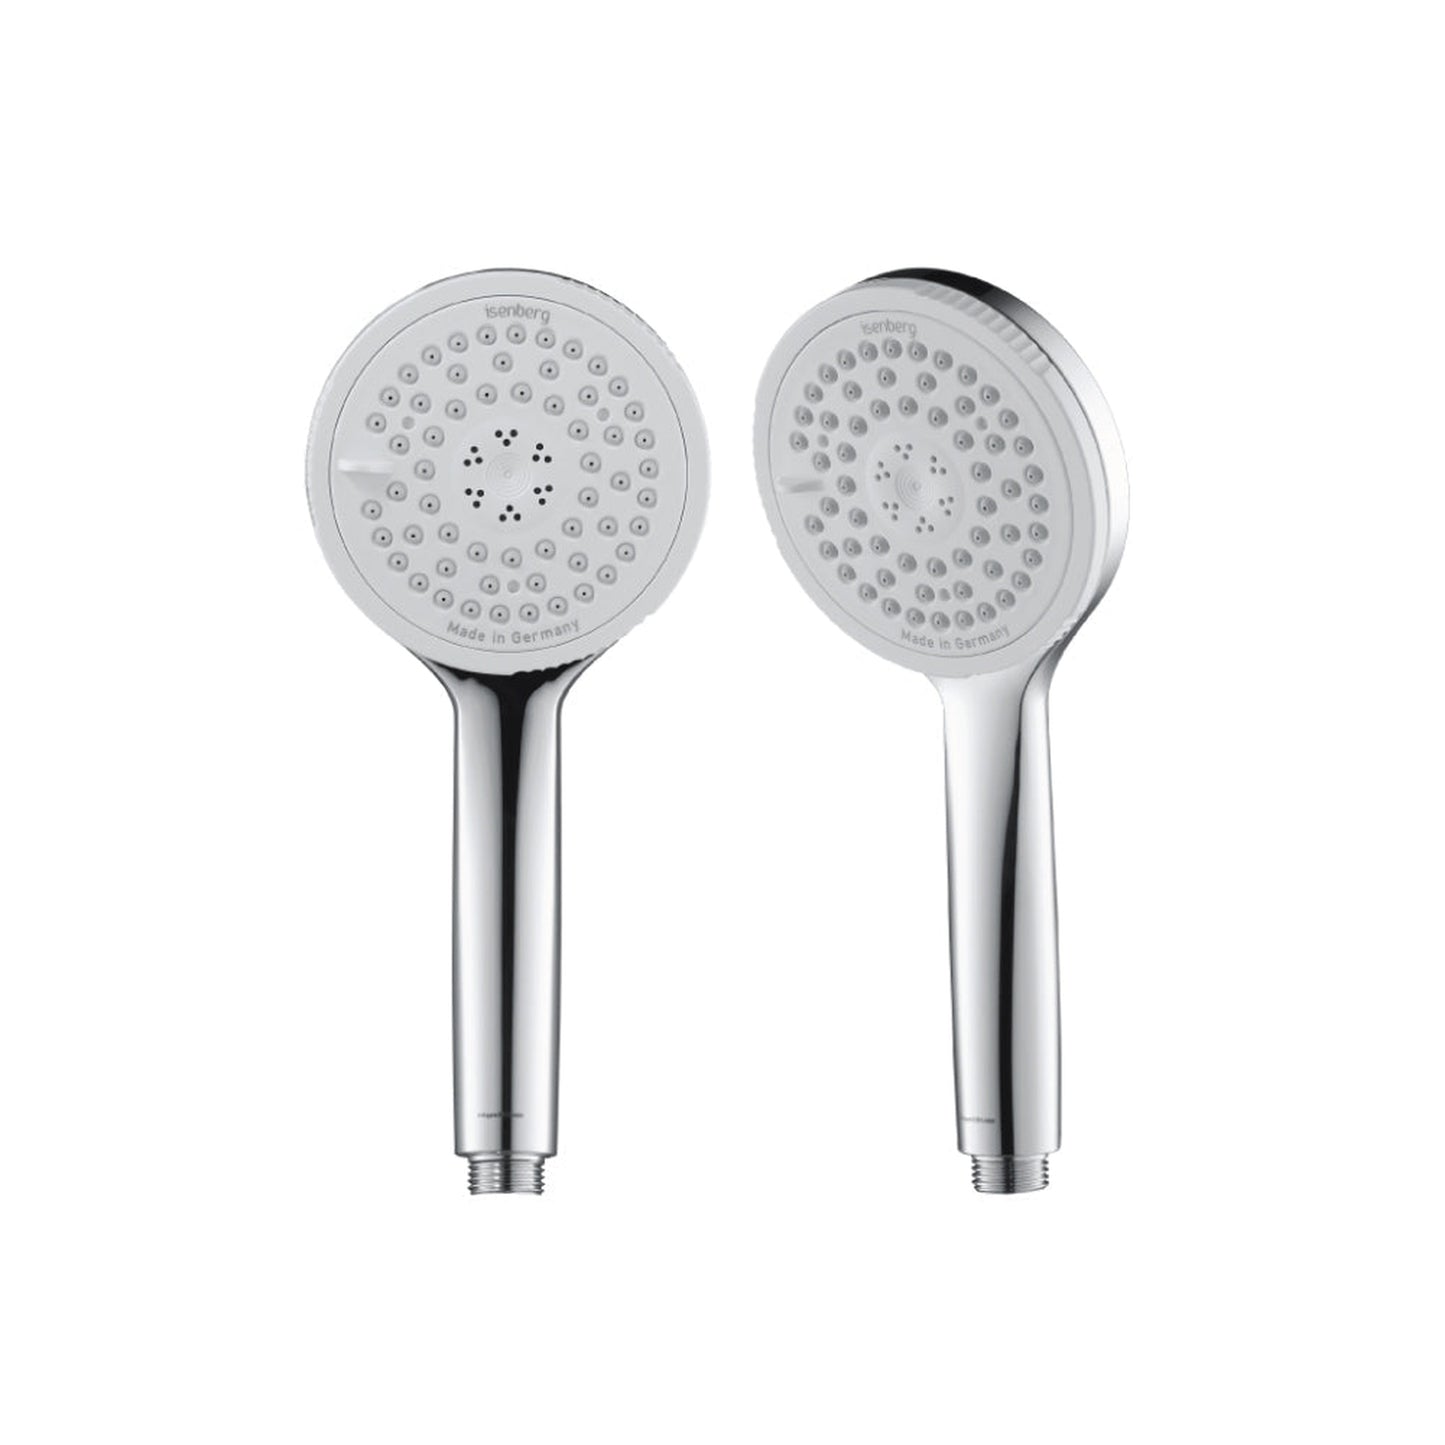 Isenberg Universal Fixtures Multi-Function ABS Hand Held Shower Head in Chrome (HS6190CP)